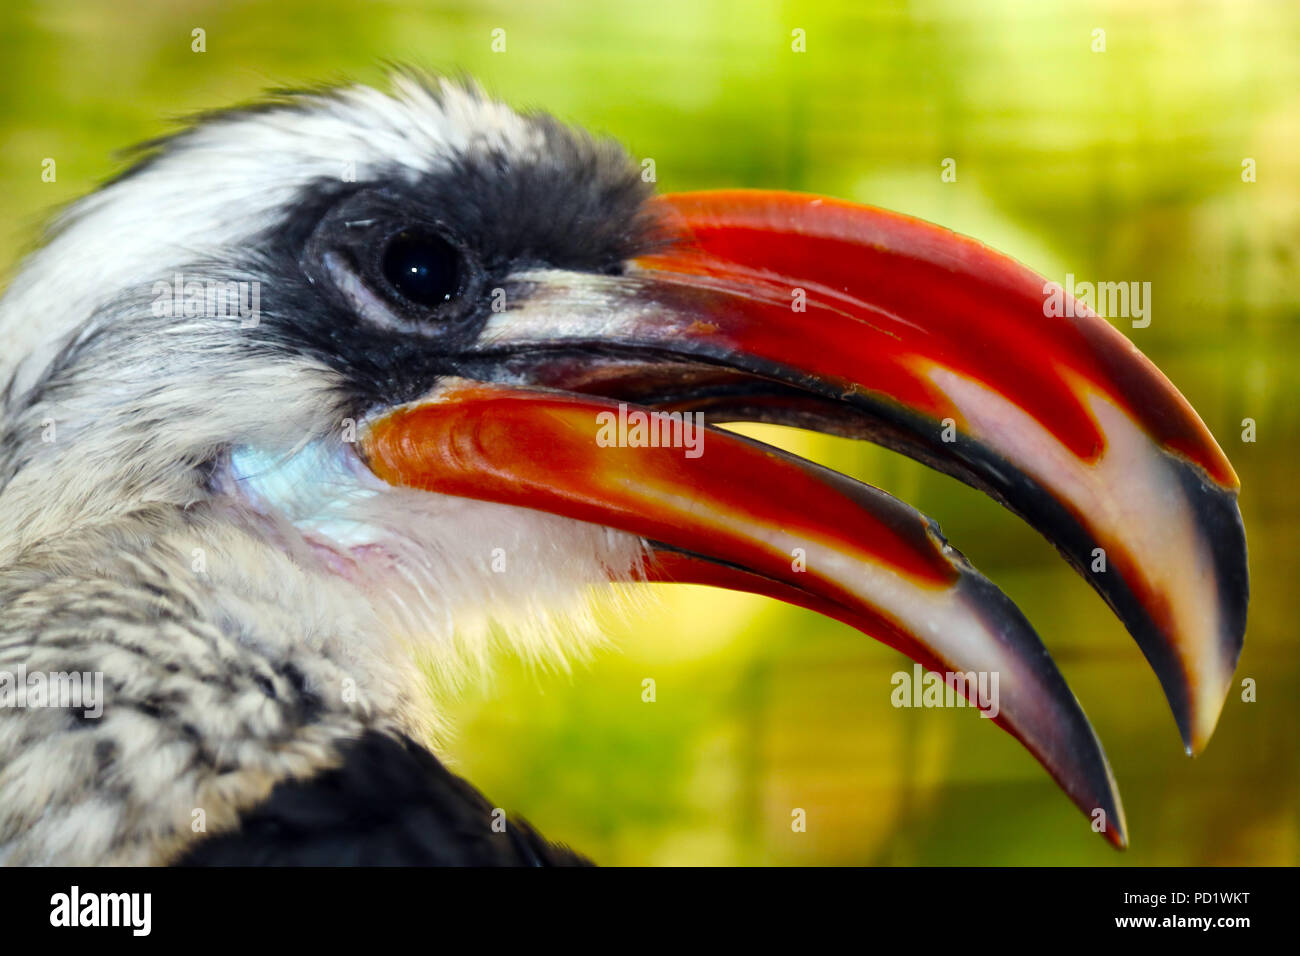 head of a male decken hornbill (tockus deckeni) with an open beak in profile view in front of a blurry floral background Stock Photo